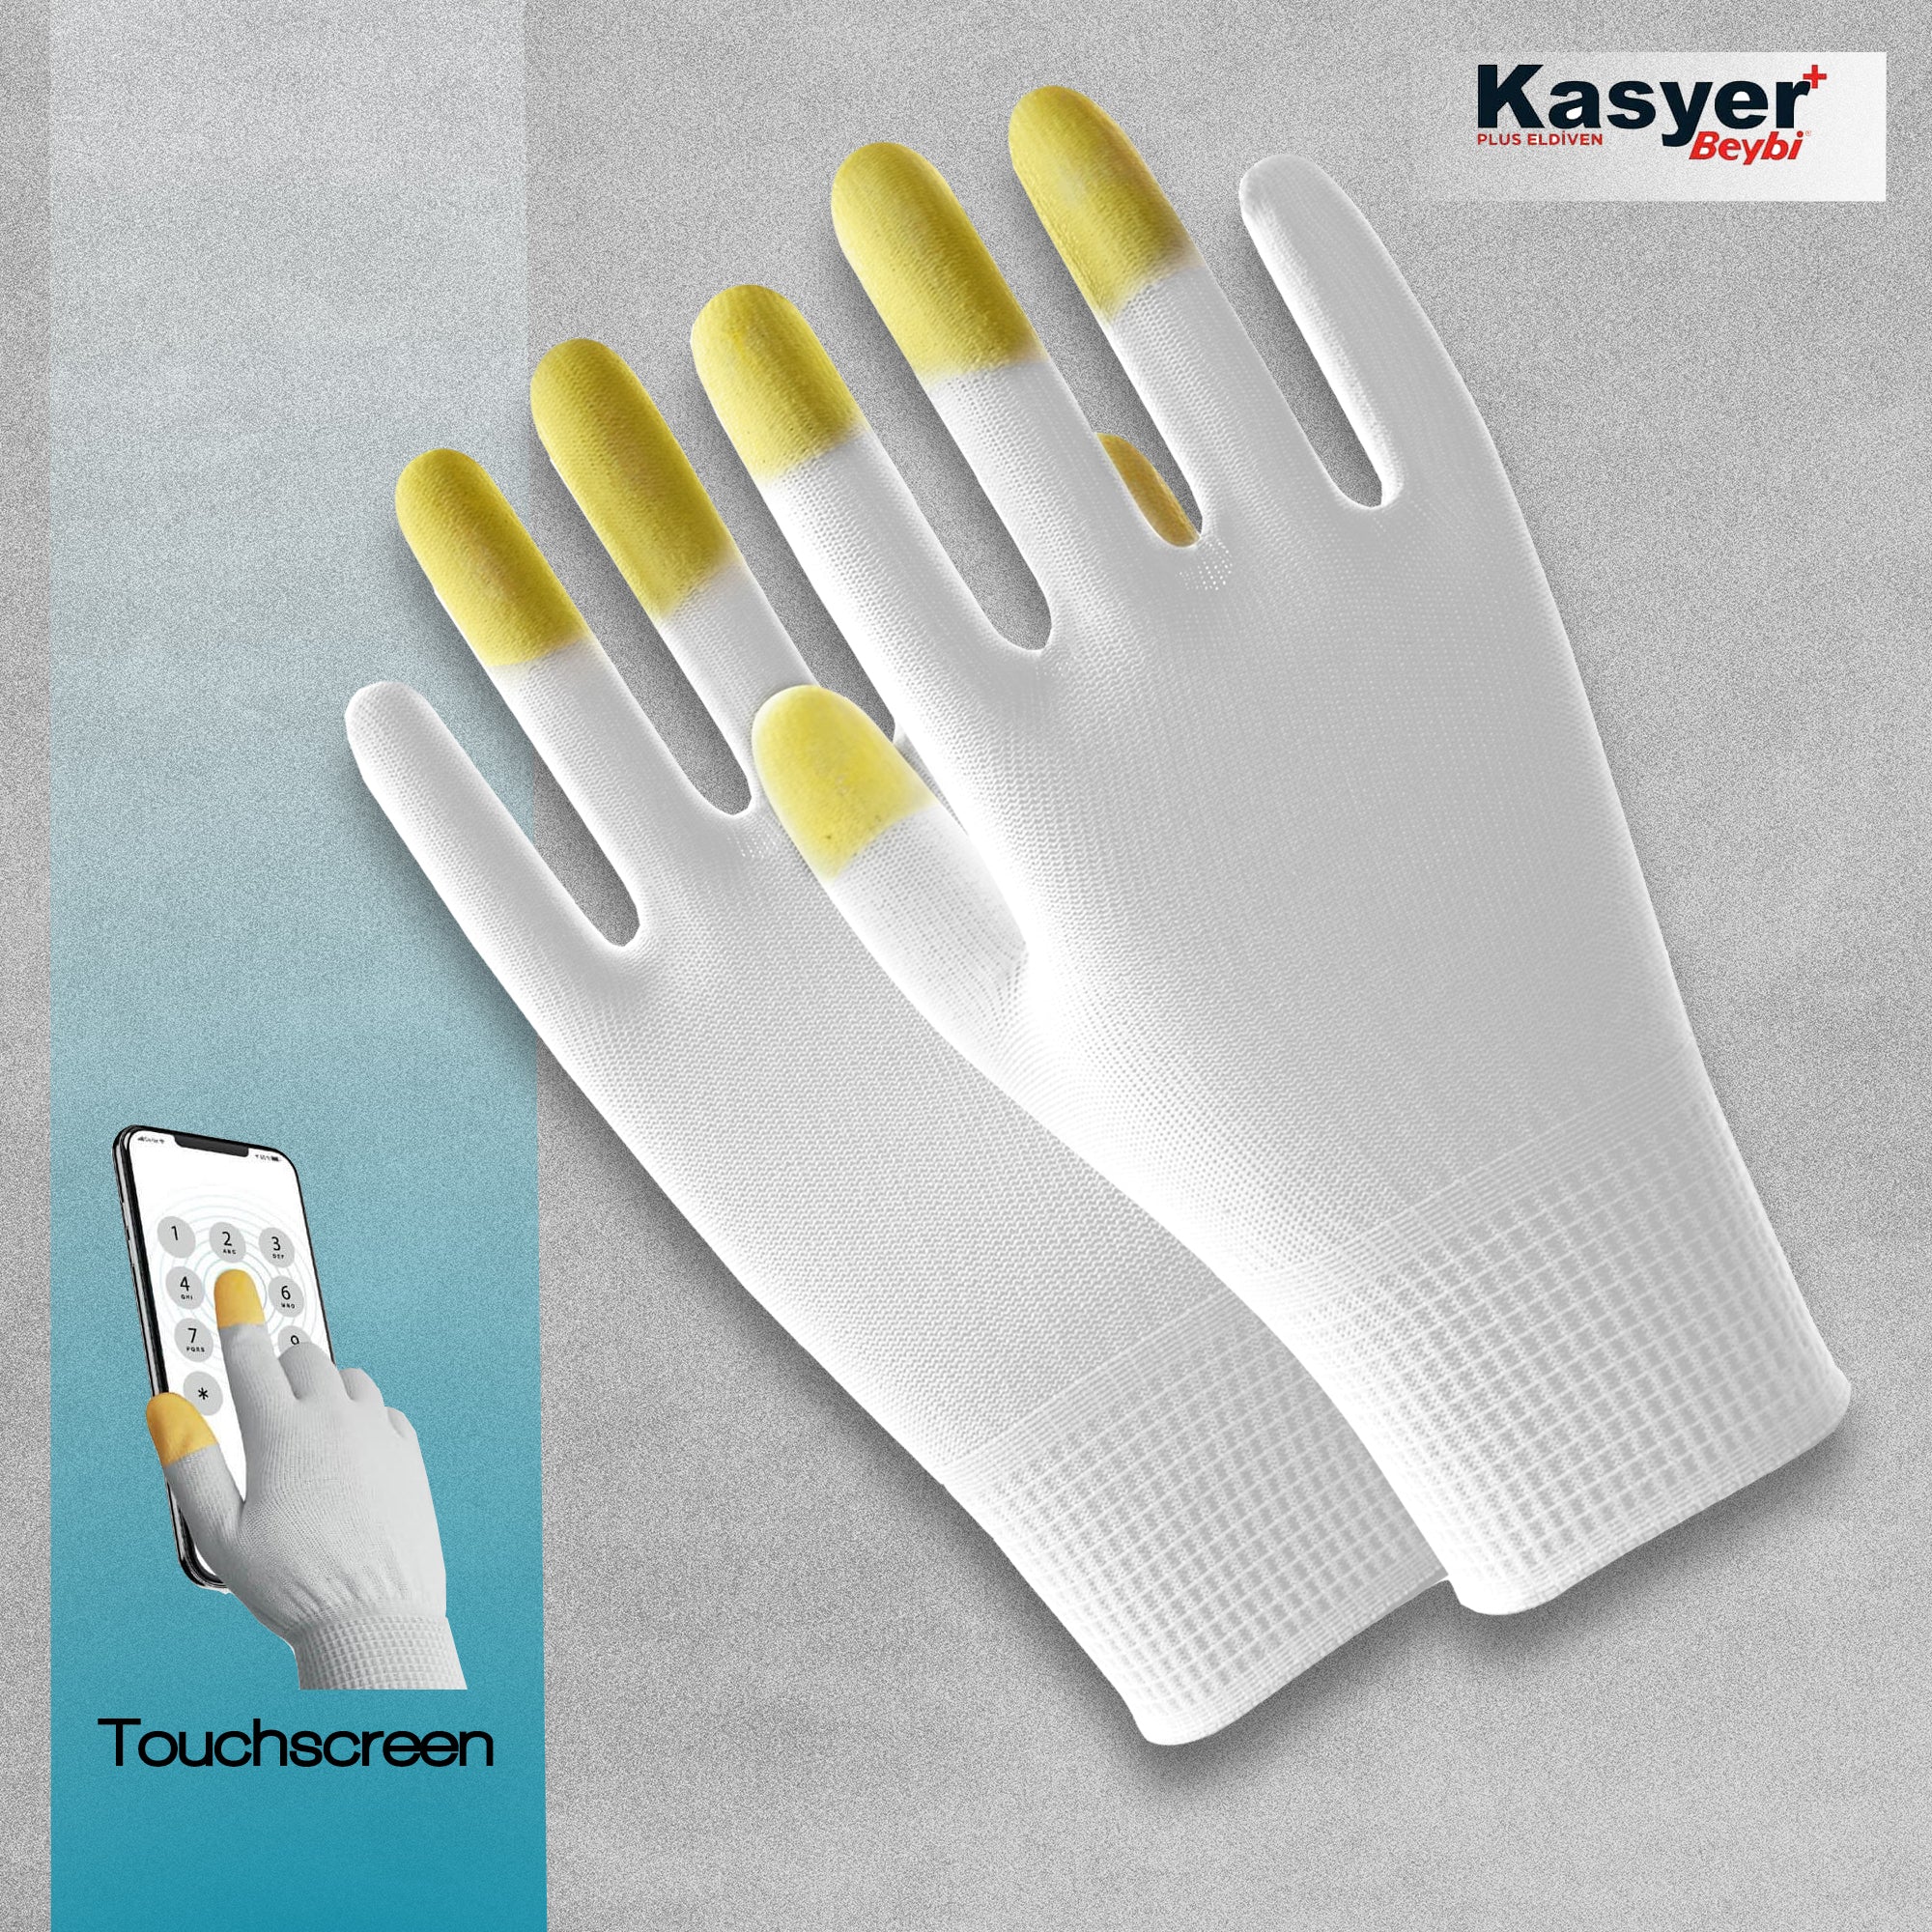 Kasyer Touch Screen Plus Polyester White Gloves S/M - Pack of 3 Pairs